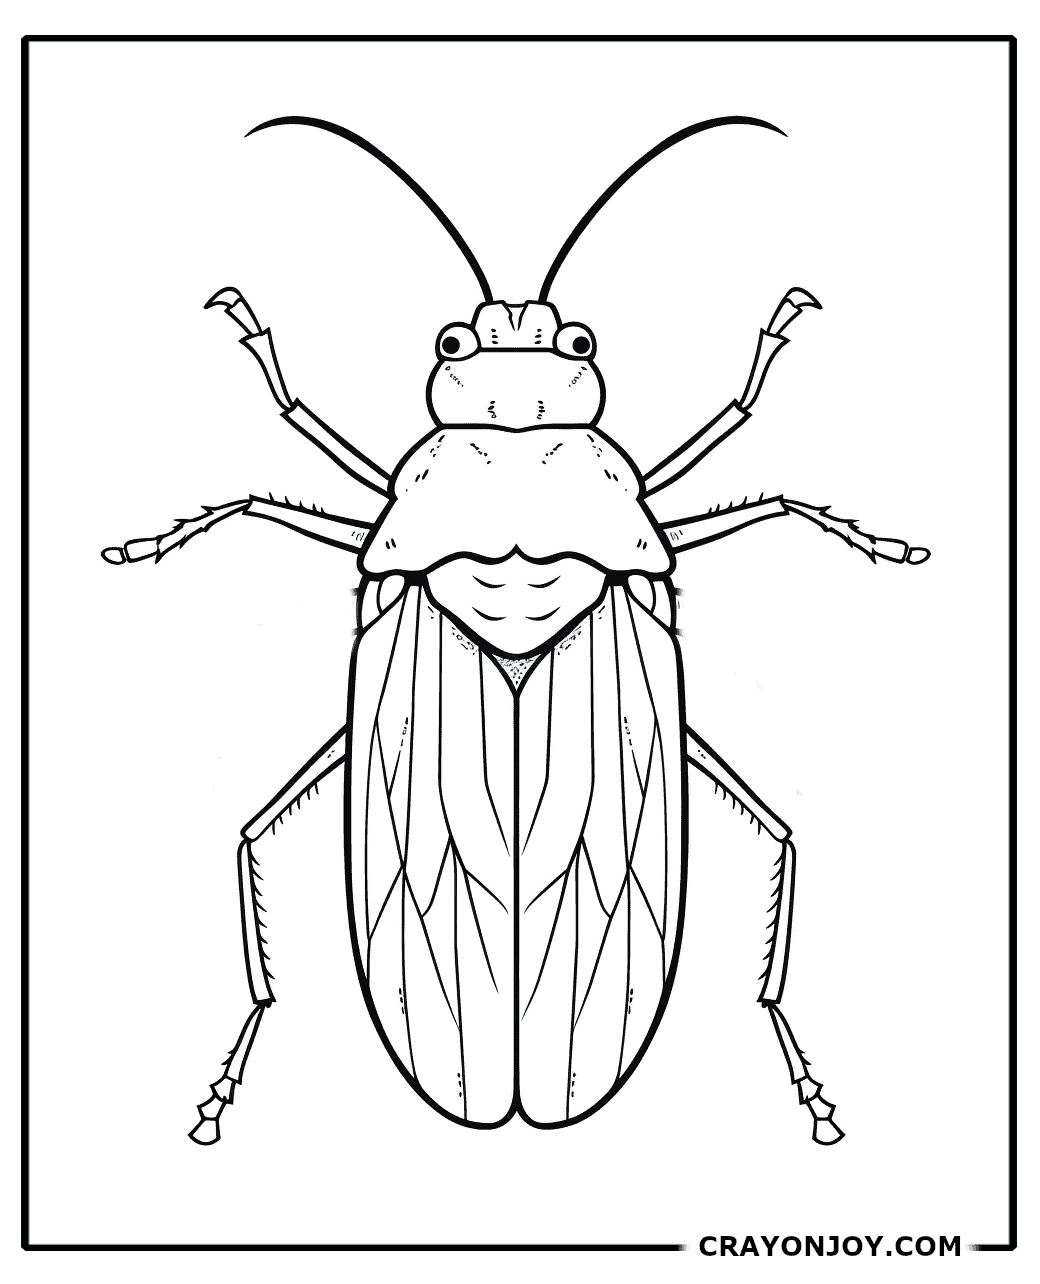 Free Printable Aphids Coloring Pages for Kids & Adults